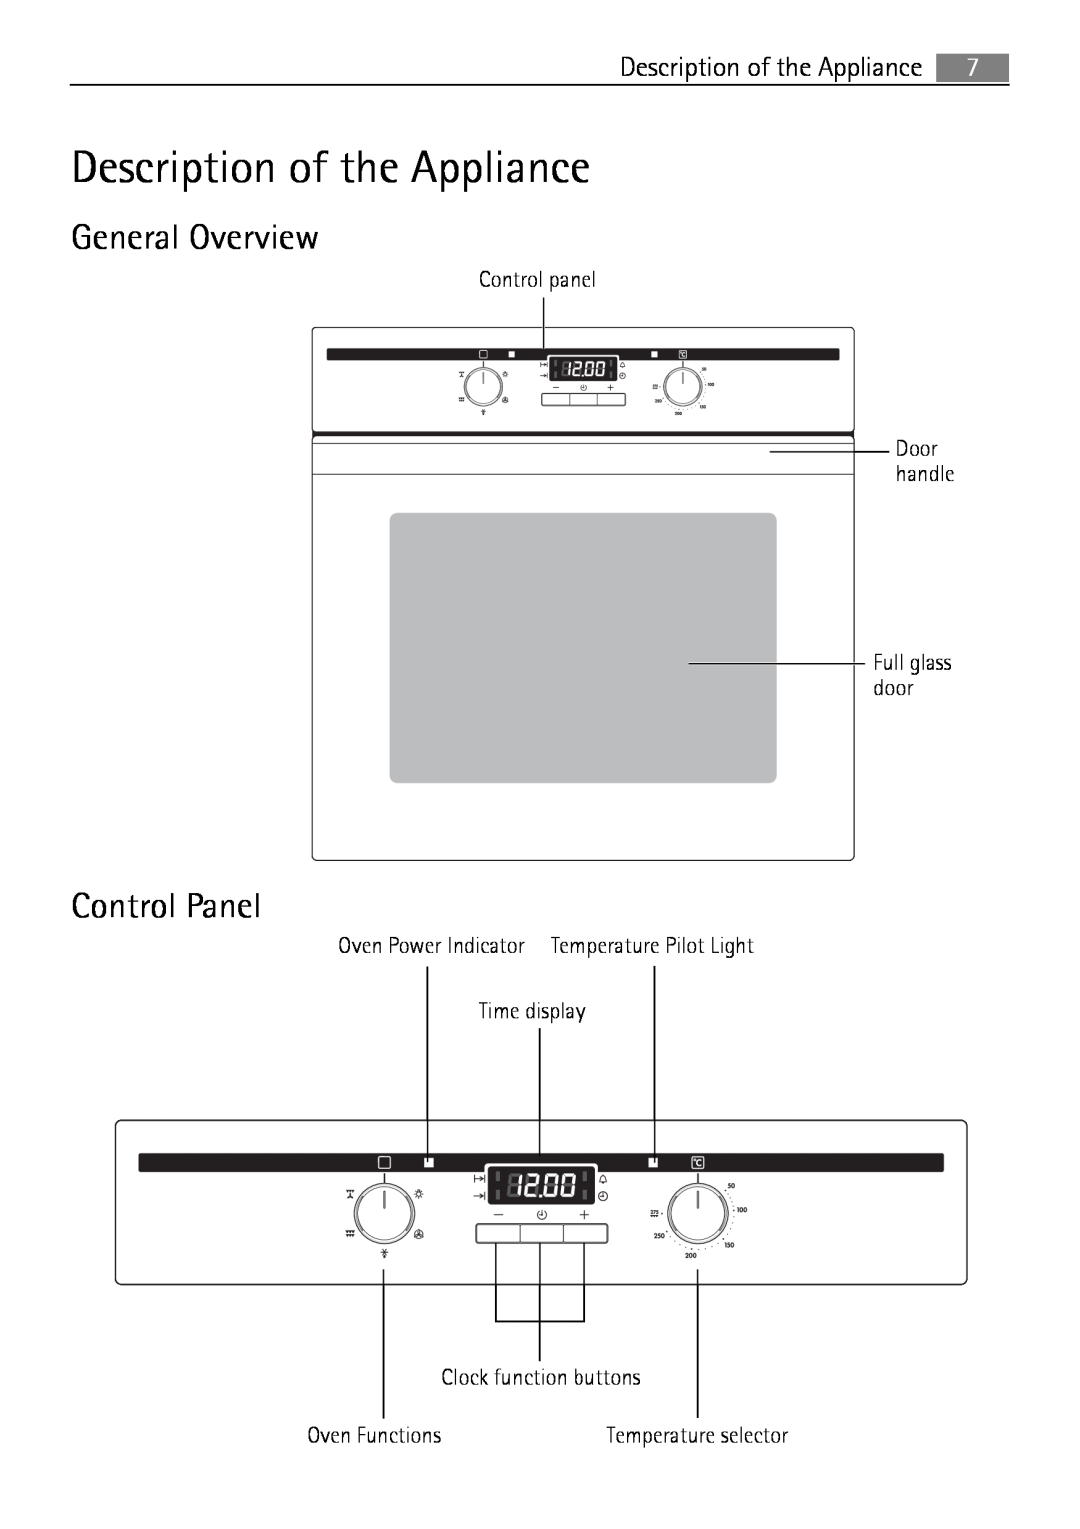 Electrolux B2100-5 user manual Description of the Appliance, General Overview, Control Panel 